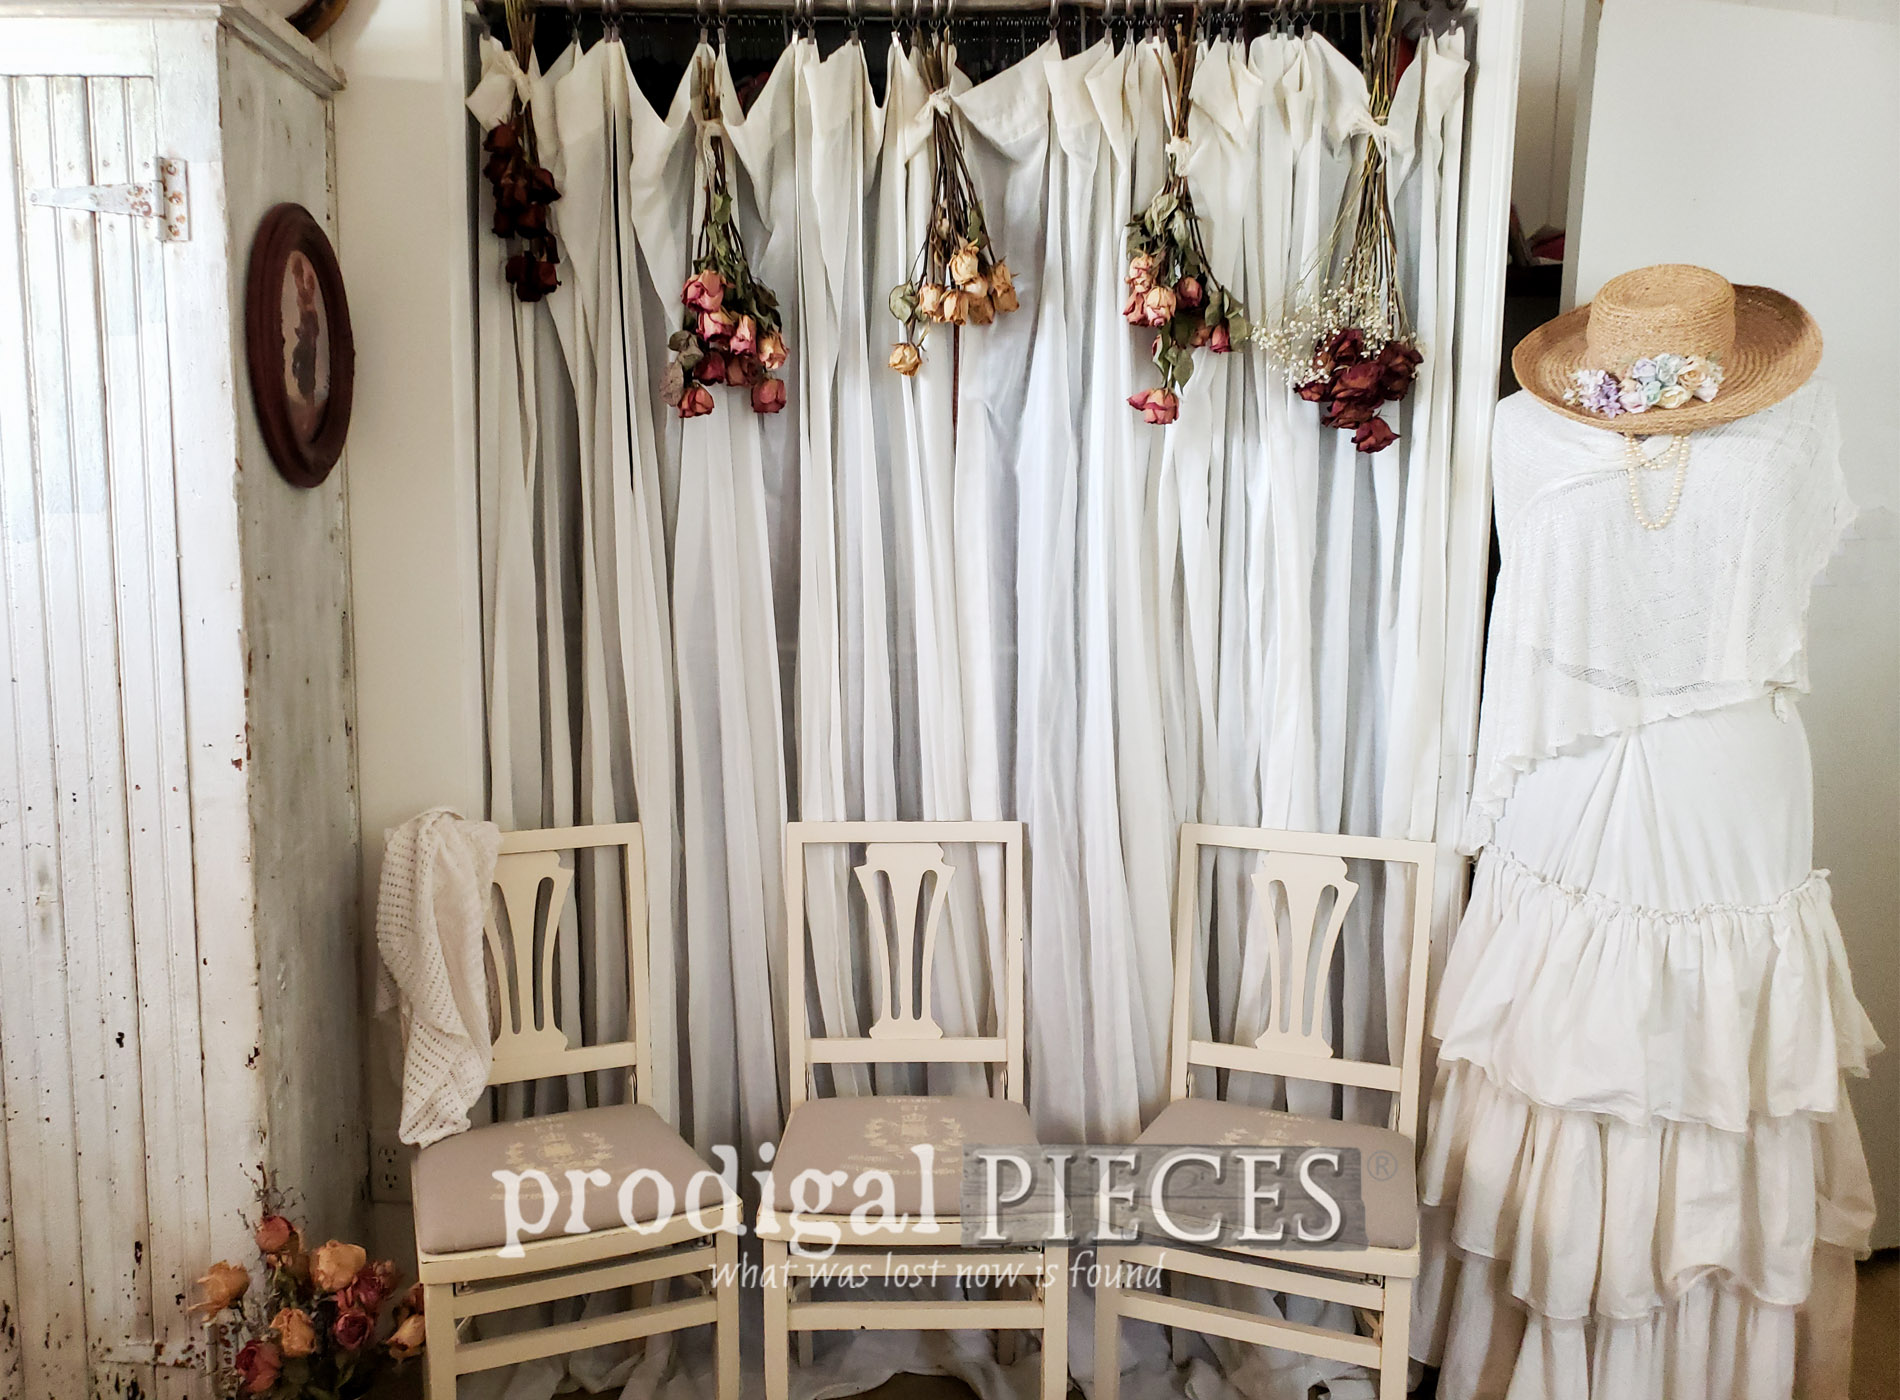 Featured Vintage Folding Chairs Made French Farmhouse Style by Larissa of Prodigal Pieces | prodigalpieces.com #prodigalpieces #furniture #home #homedecor #farmhouse #french #vintage